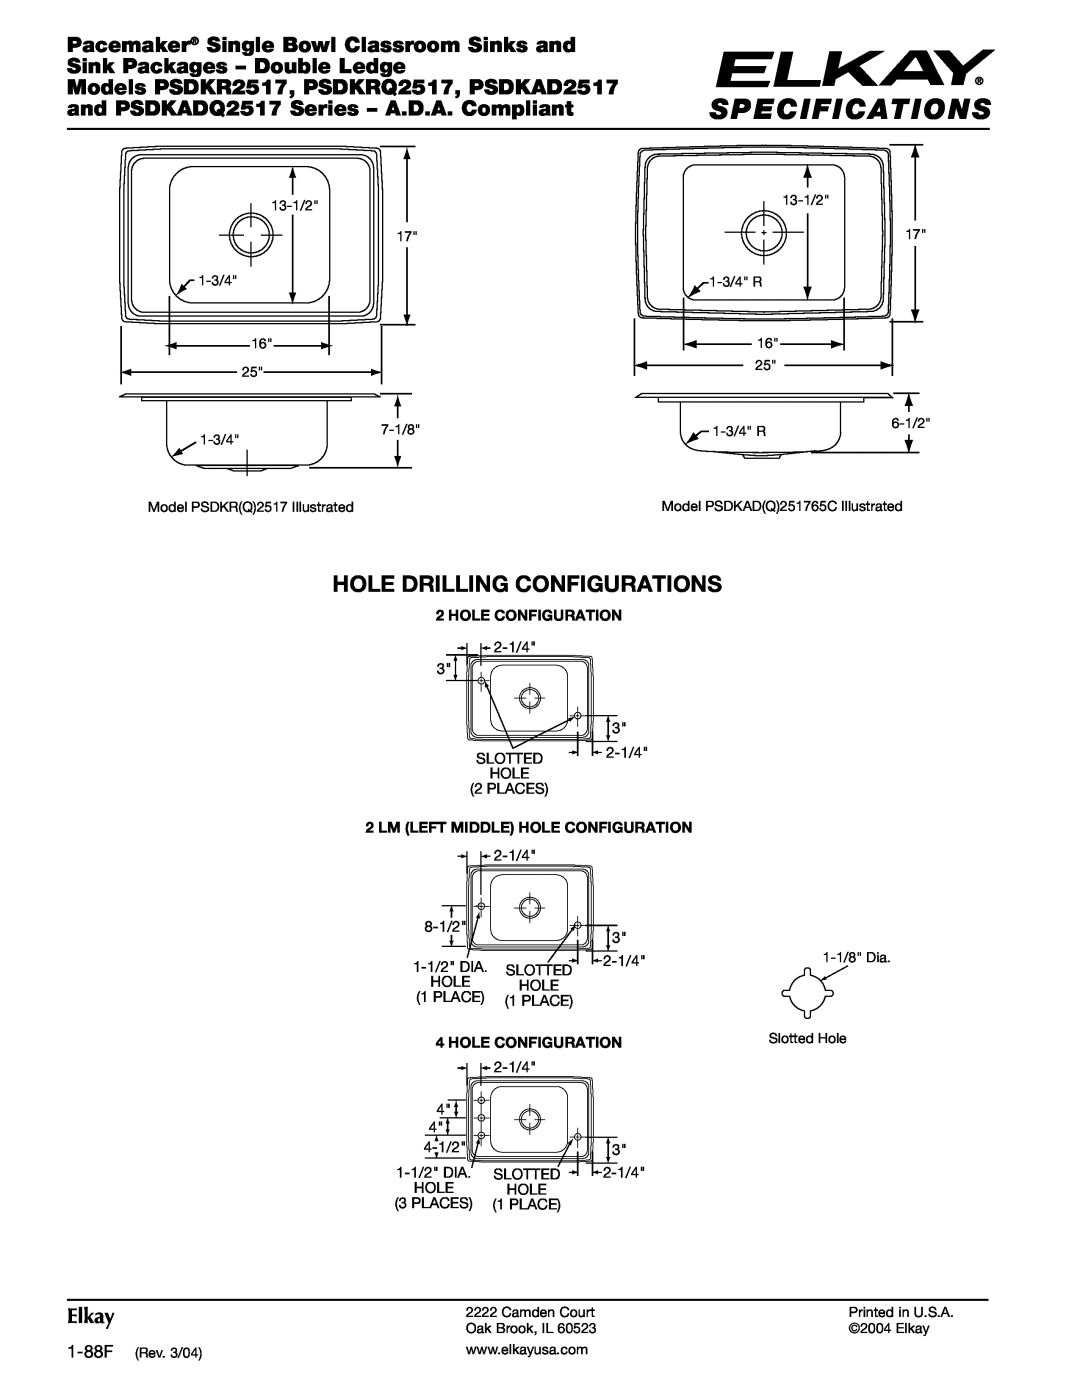 Elkay PSDKAD2517, PSDKR2517 Specifications, Hole Drilling Configurations, Pacemaker Single Bowl Classroom Sinks and, Elkay 